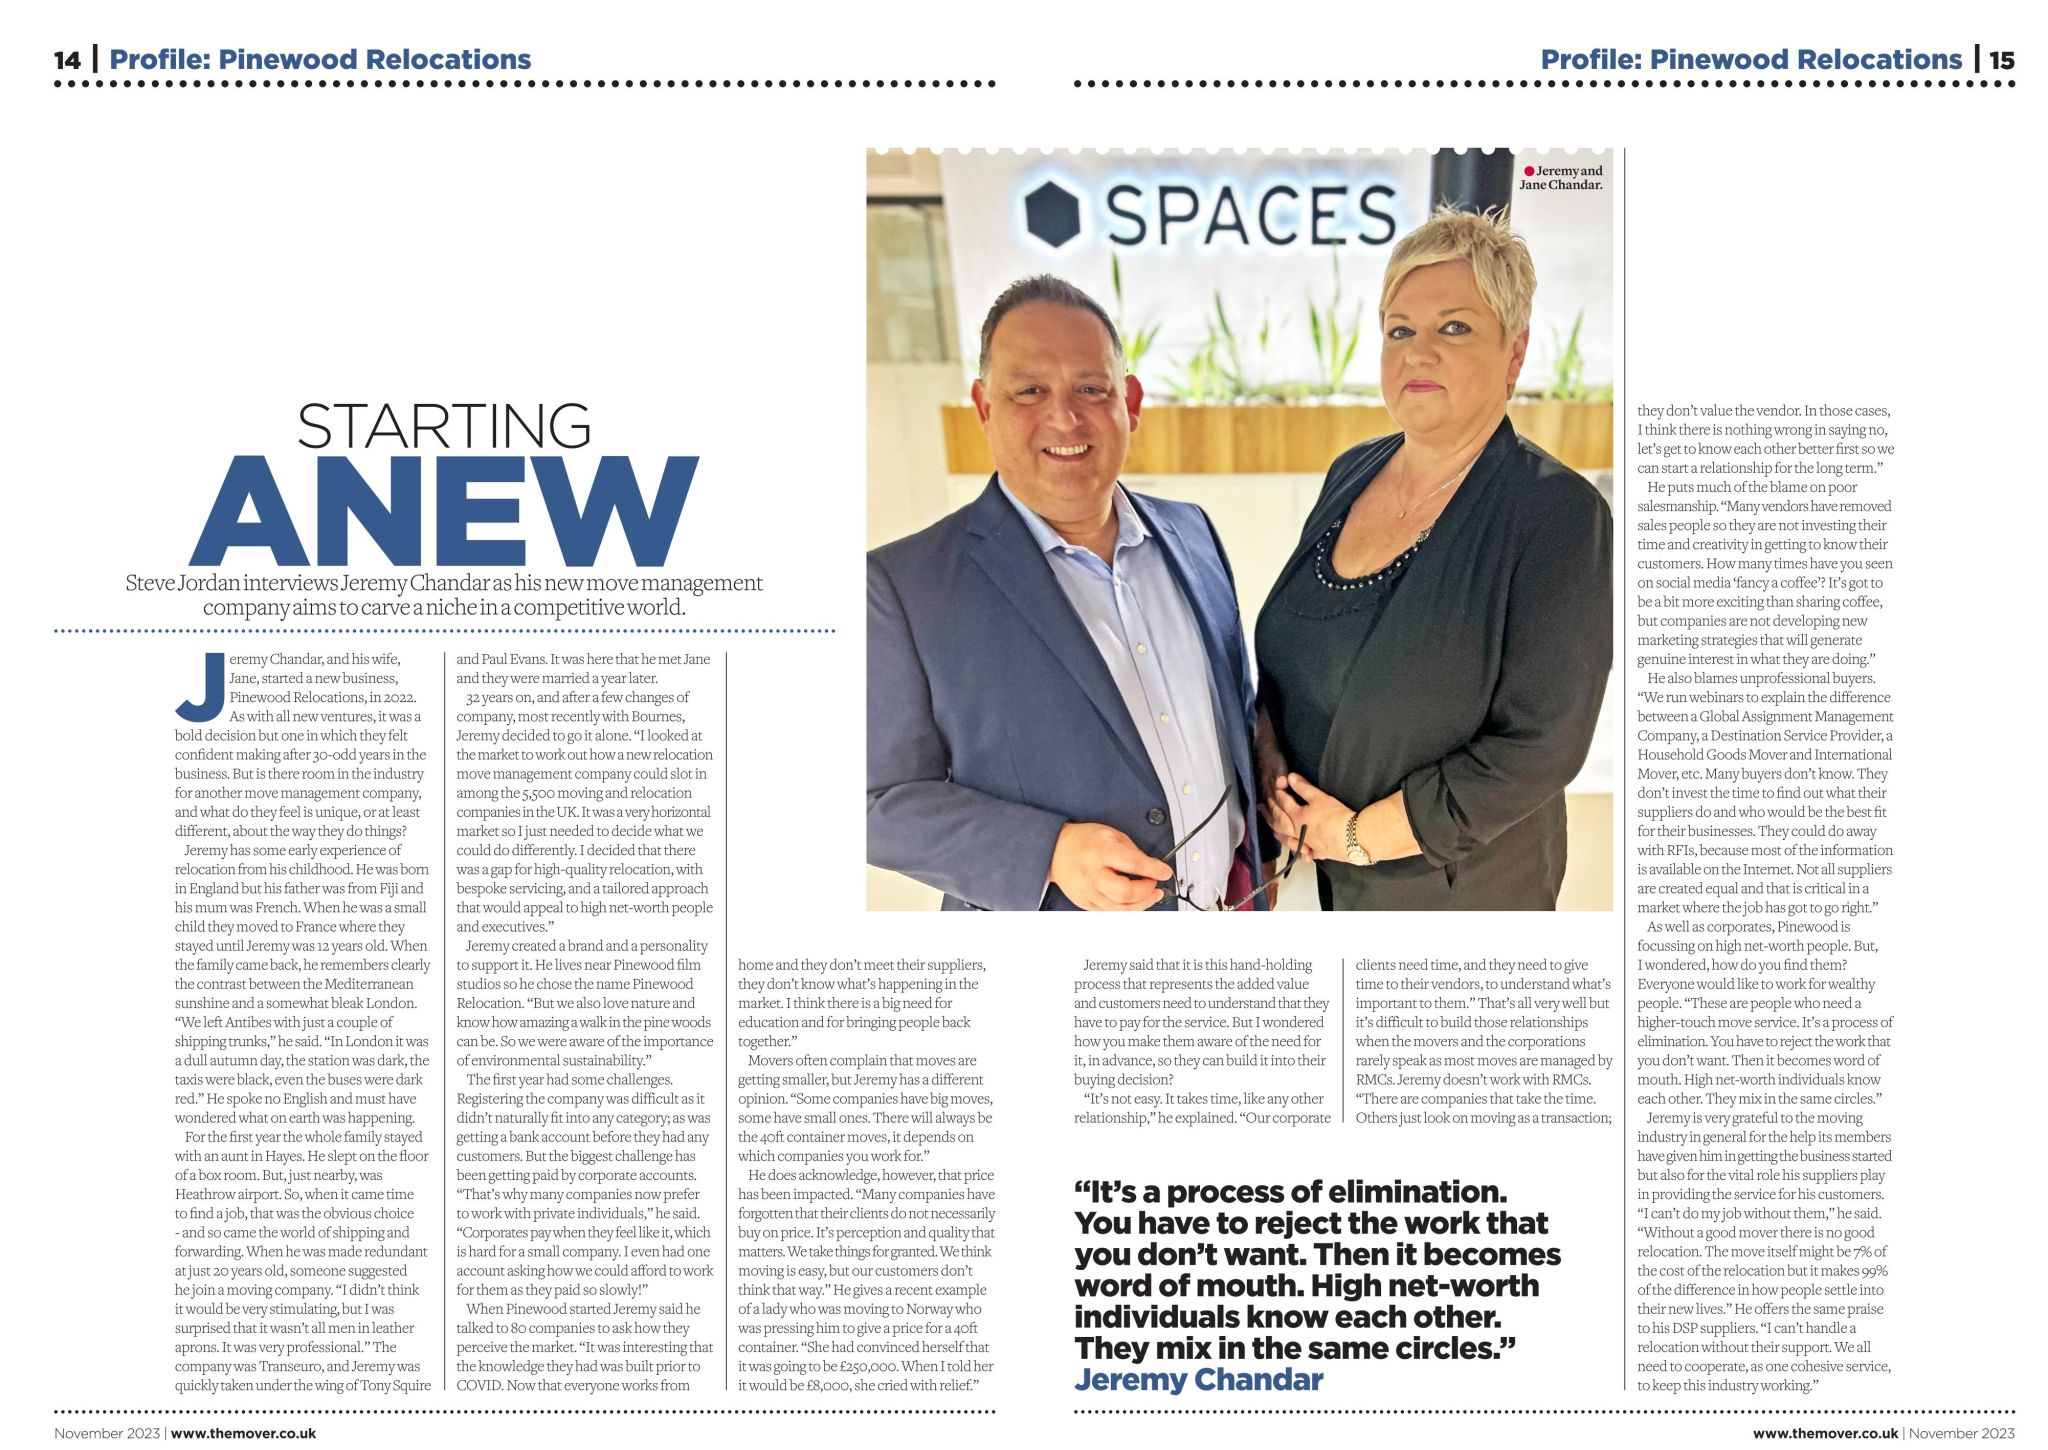 Pinewood Relocations Appeared Mover Magazine